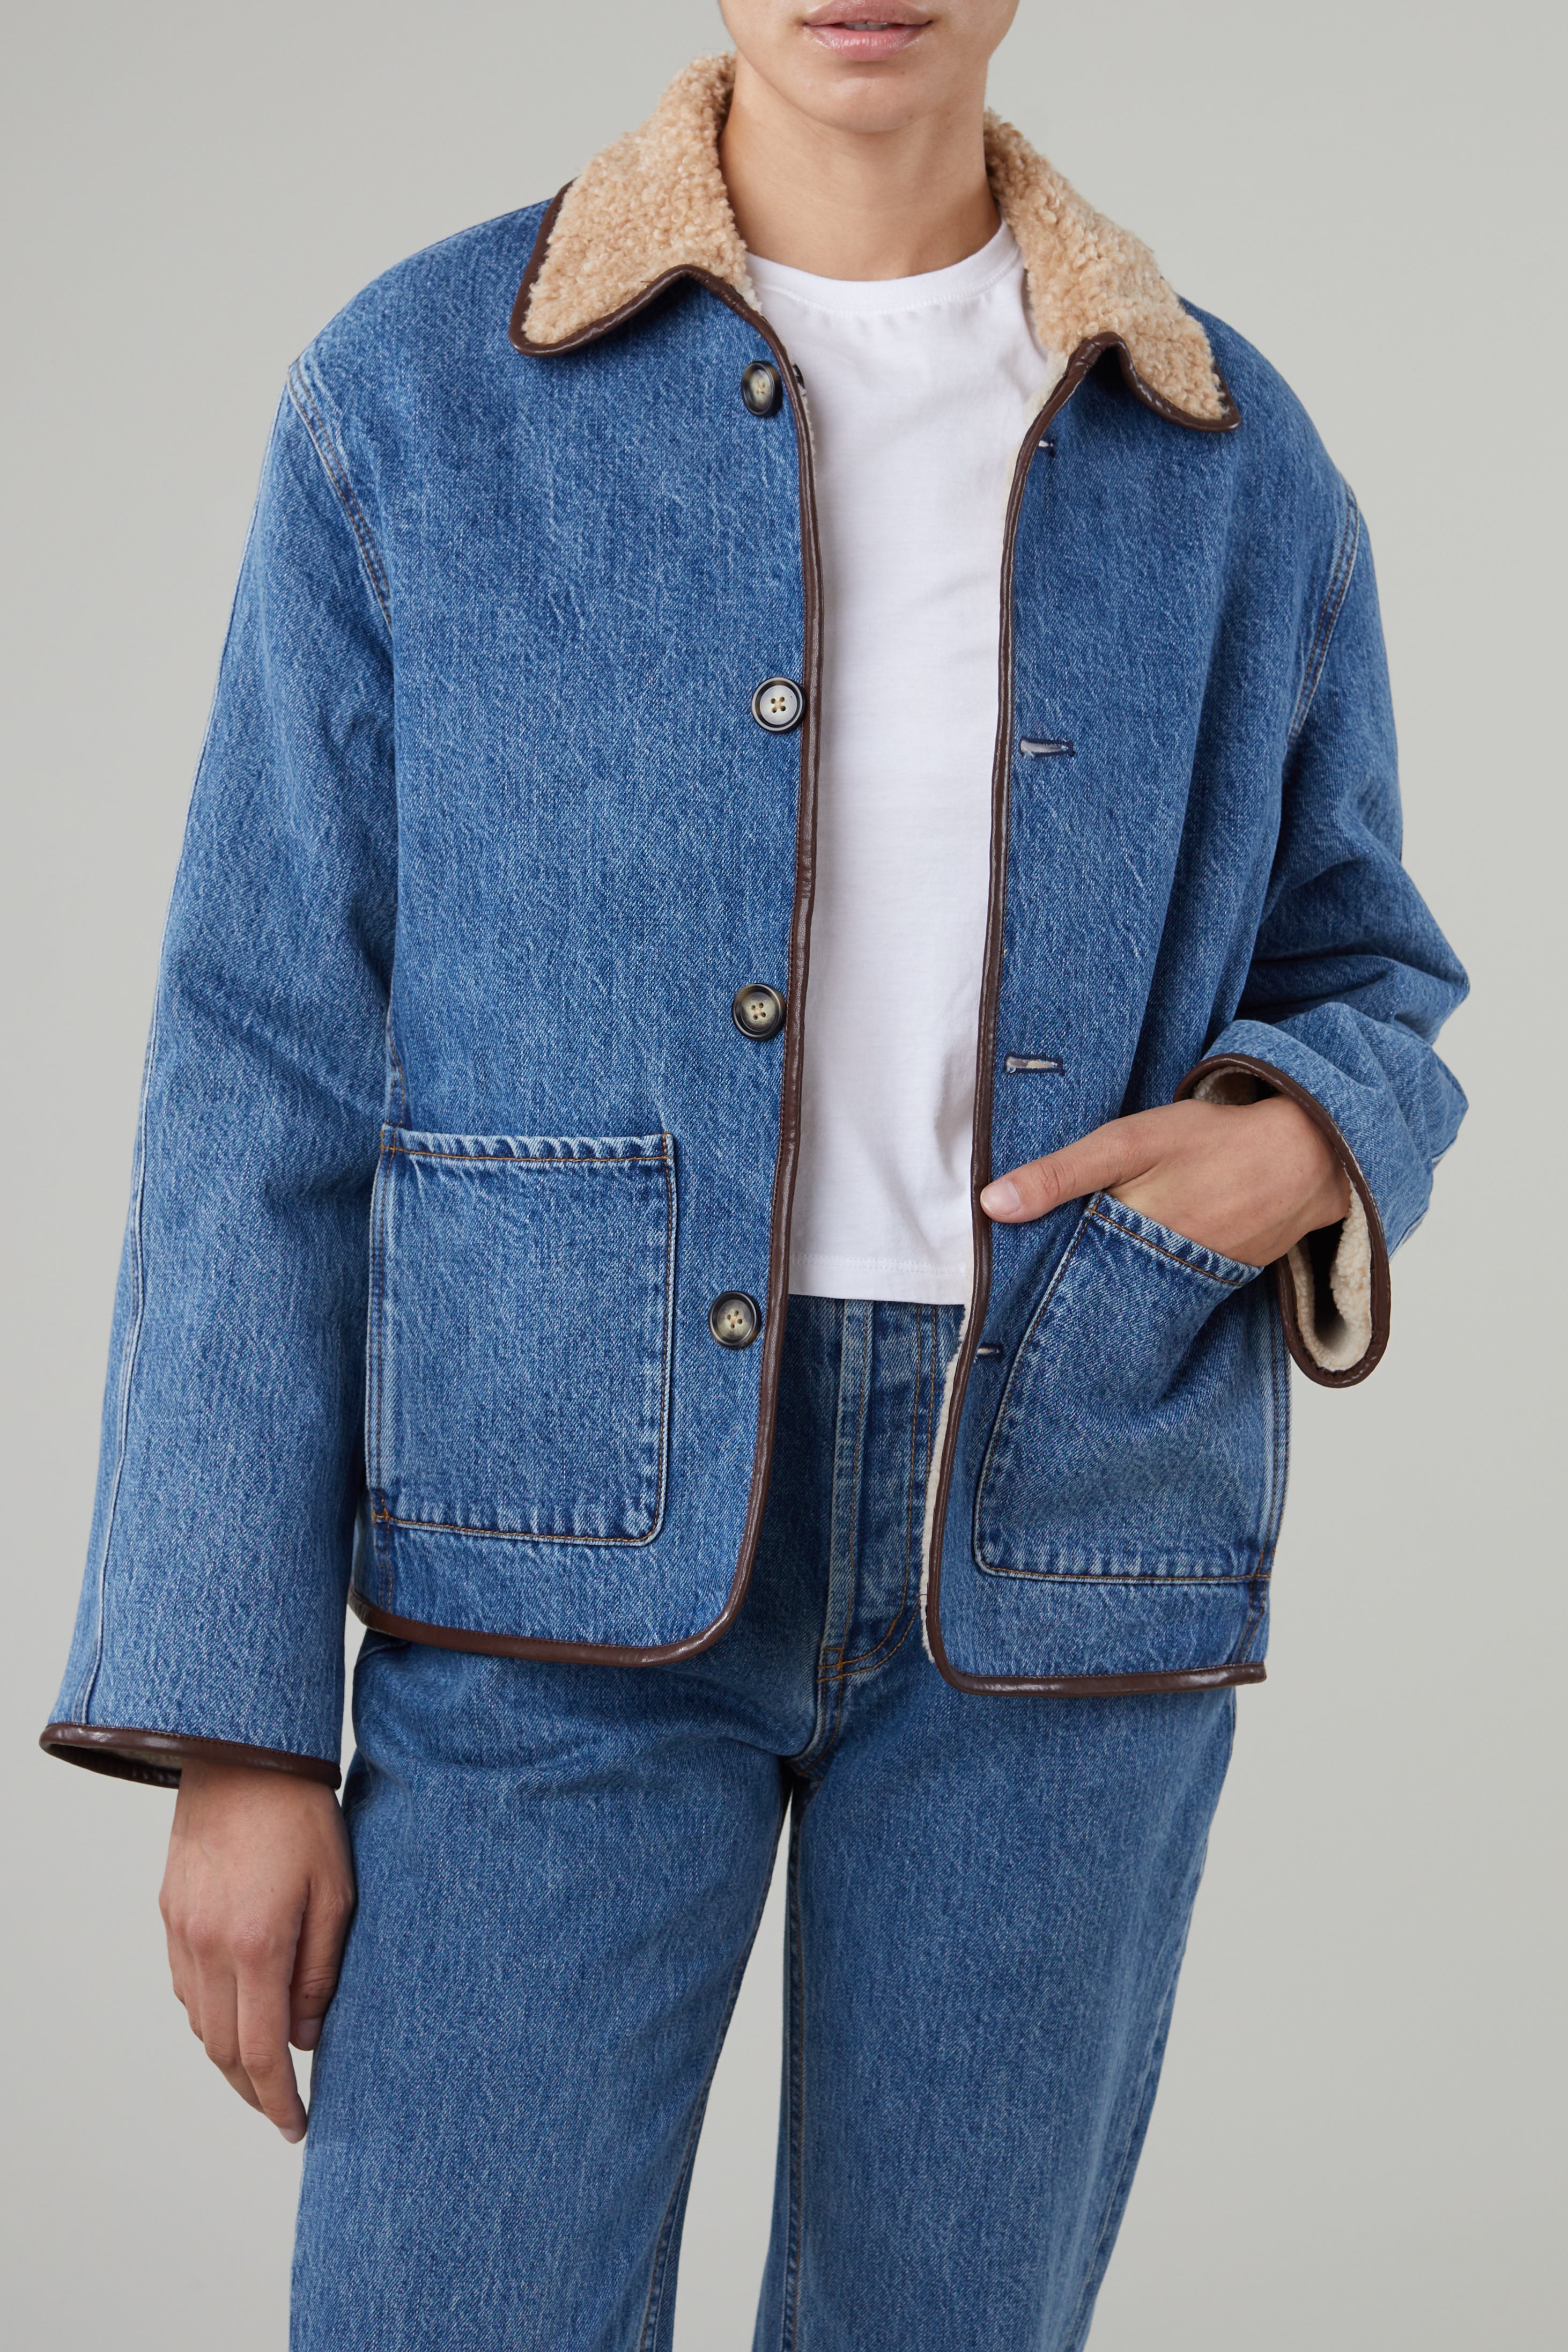 Townes Jacket in Classic Blue